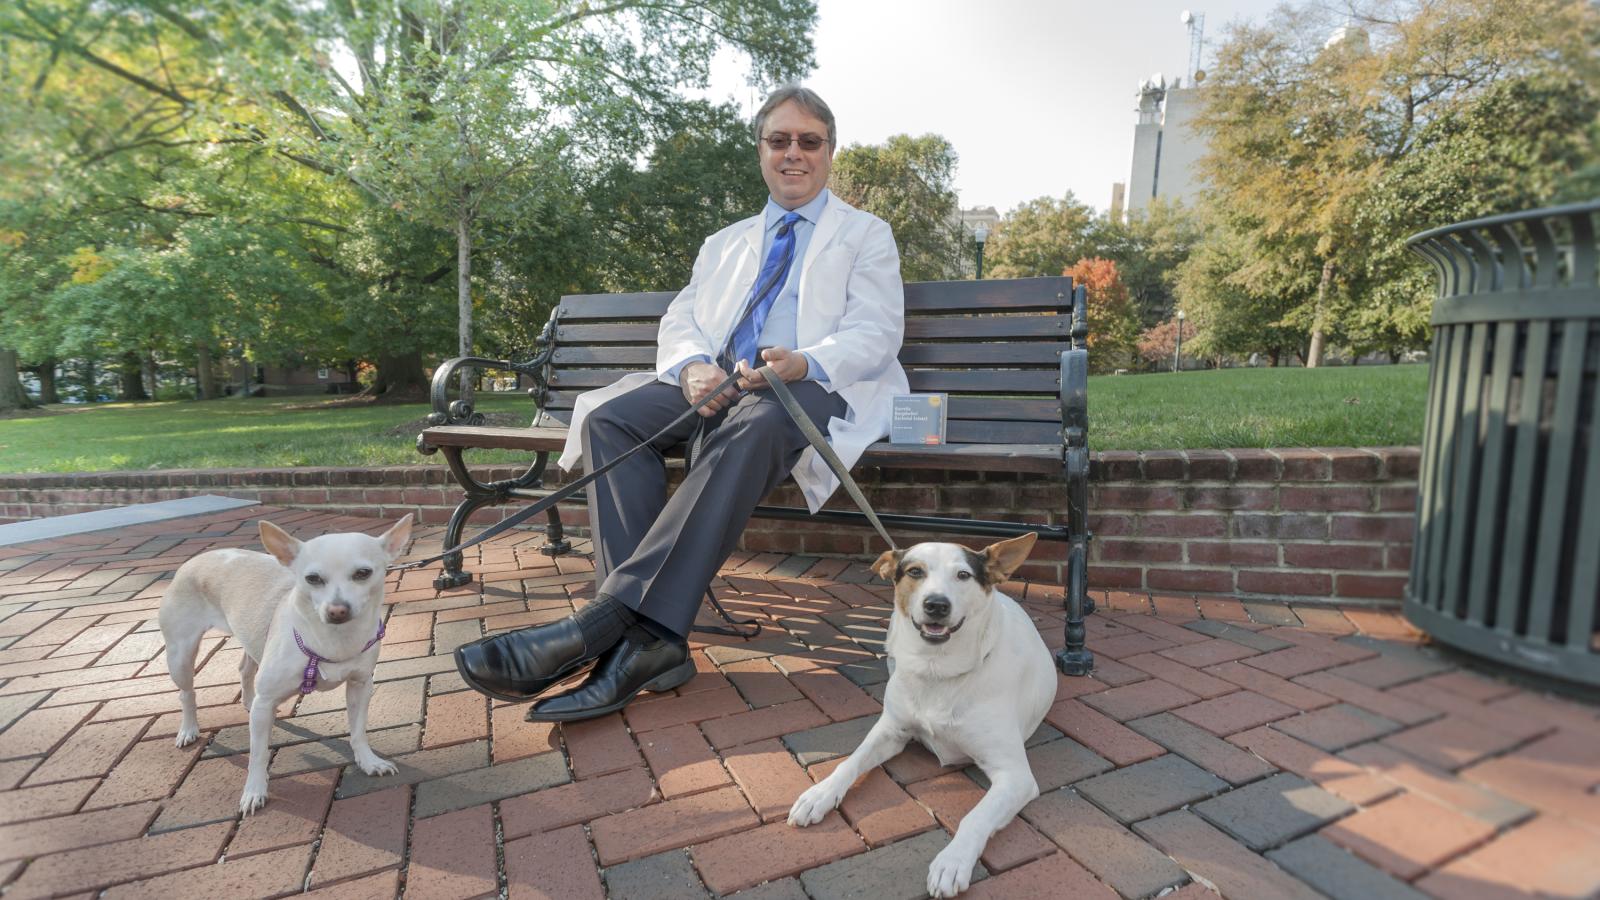 Richard T. Marconi, Ph.D., professor at VCU School of Medicine’s Department of Microbiology and Immunology, has developed a Lyme disease vaccine for canines, a diagnostic test for humans, and is on his way to a vaccine for humans. The Centers for Disease Control estimates there are 300,000 people diagnosed with Lyme disease in the U.S. each year, but many experts posit the number of new infections is much higher, possibly double. Photo: Karl Steinbrenner